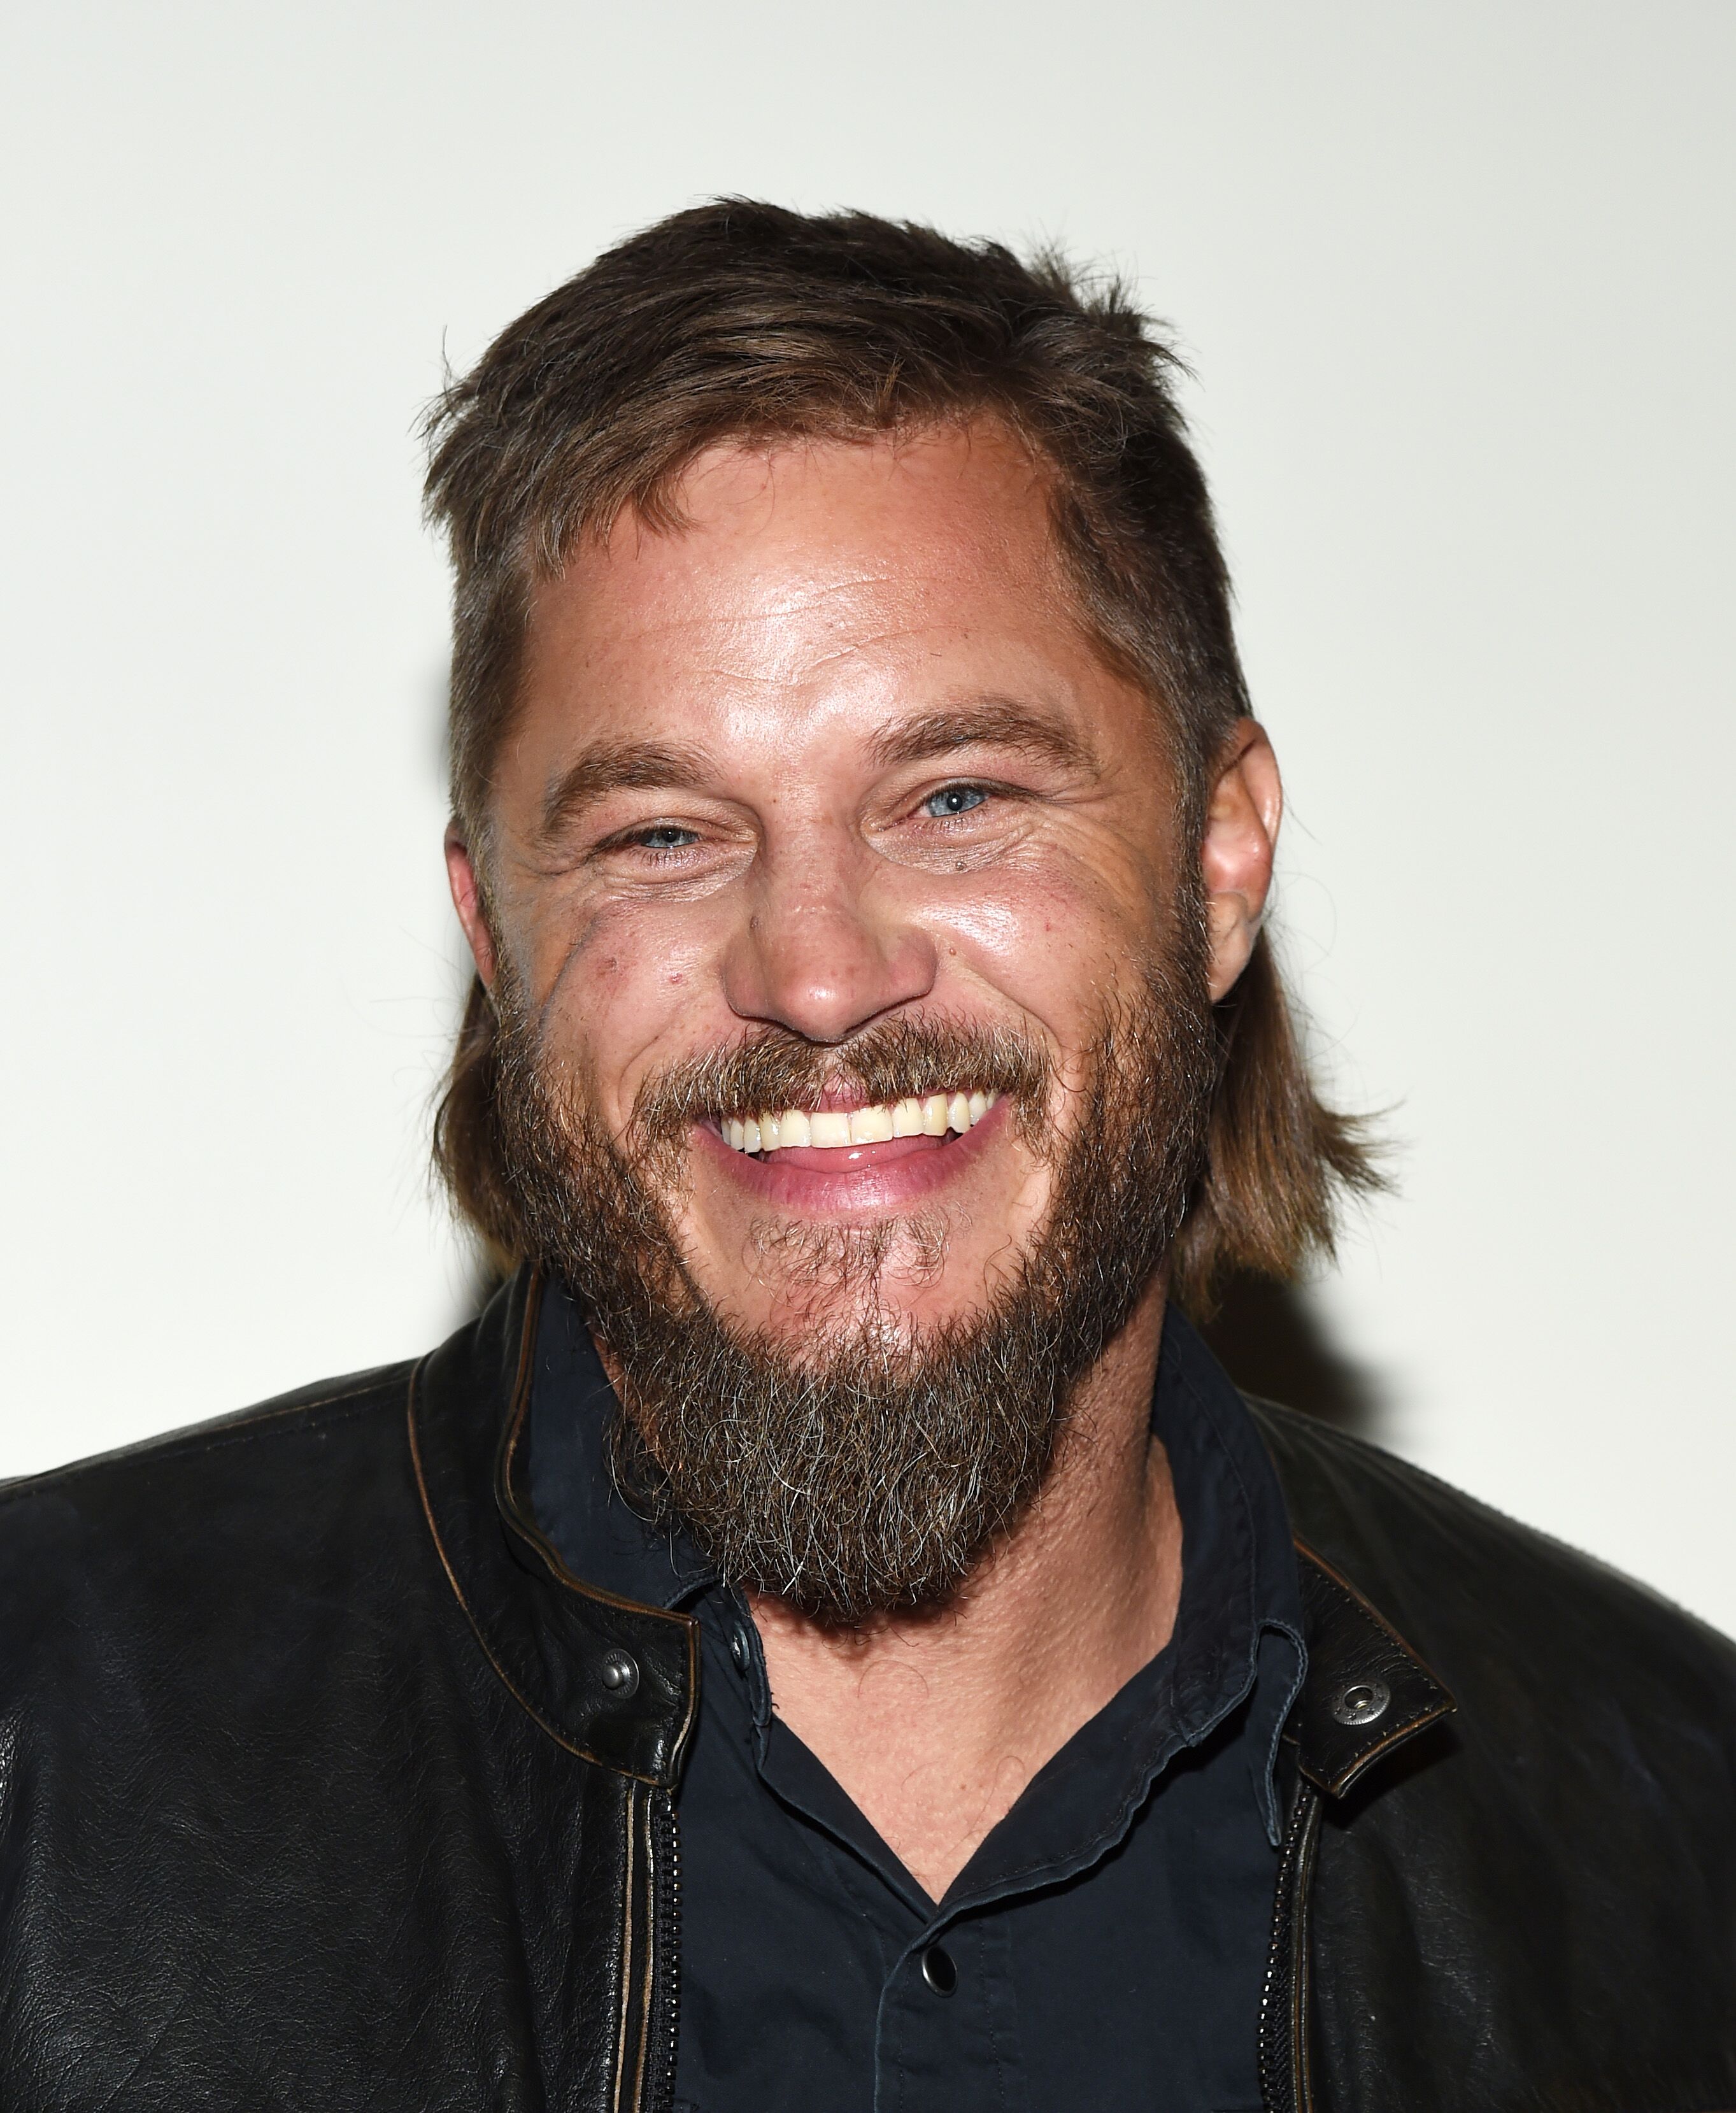 Travis Fimmel attends the "Finding Steve McQueen" Los Angeles special screening and Q&A at ArcLight Hollywood on March 11, 2019 in Hollywood, California | Photo: GettyImages